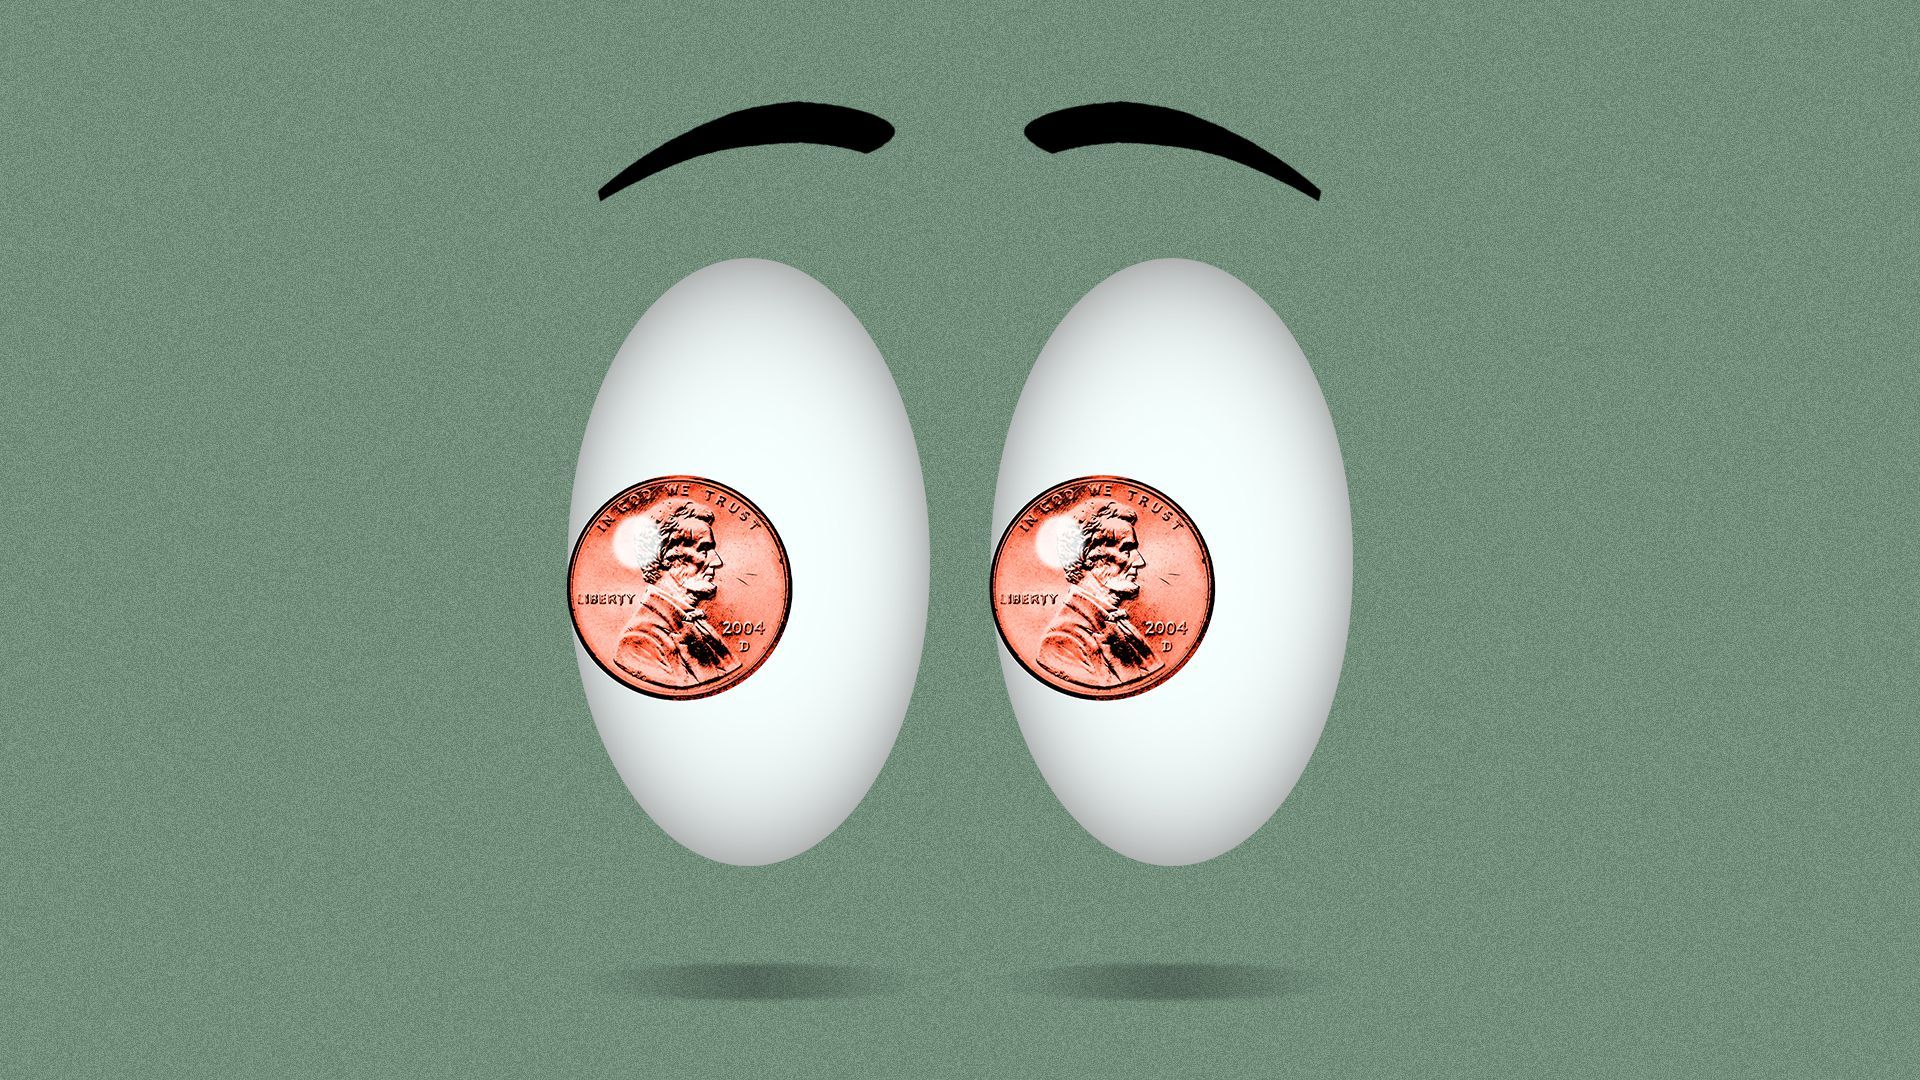 Illustration of the eyes emoji with pennies instead of pupils.